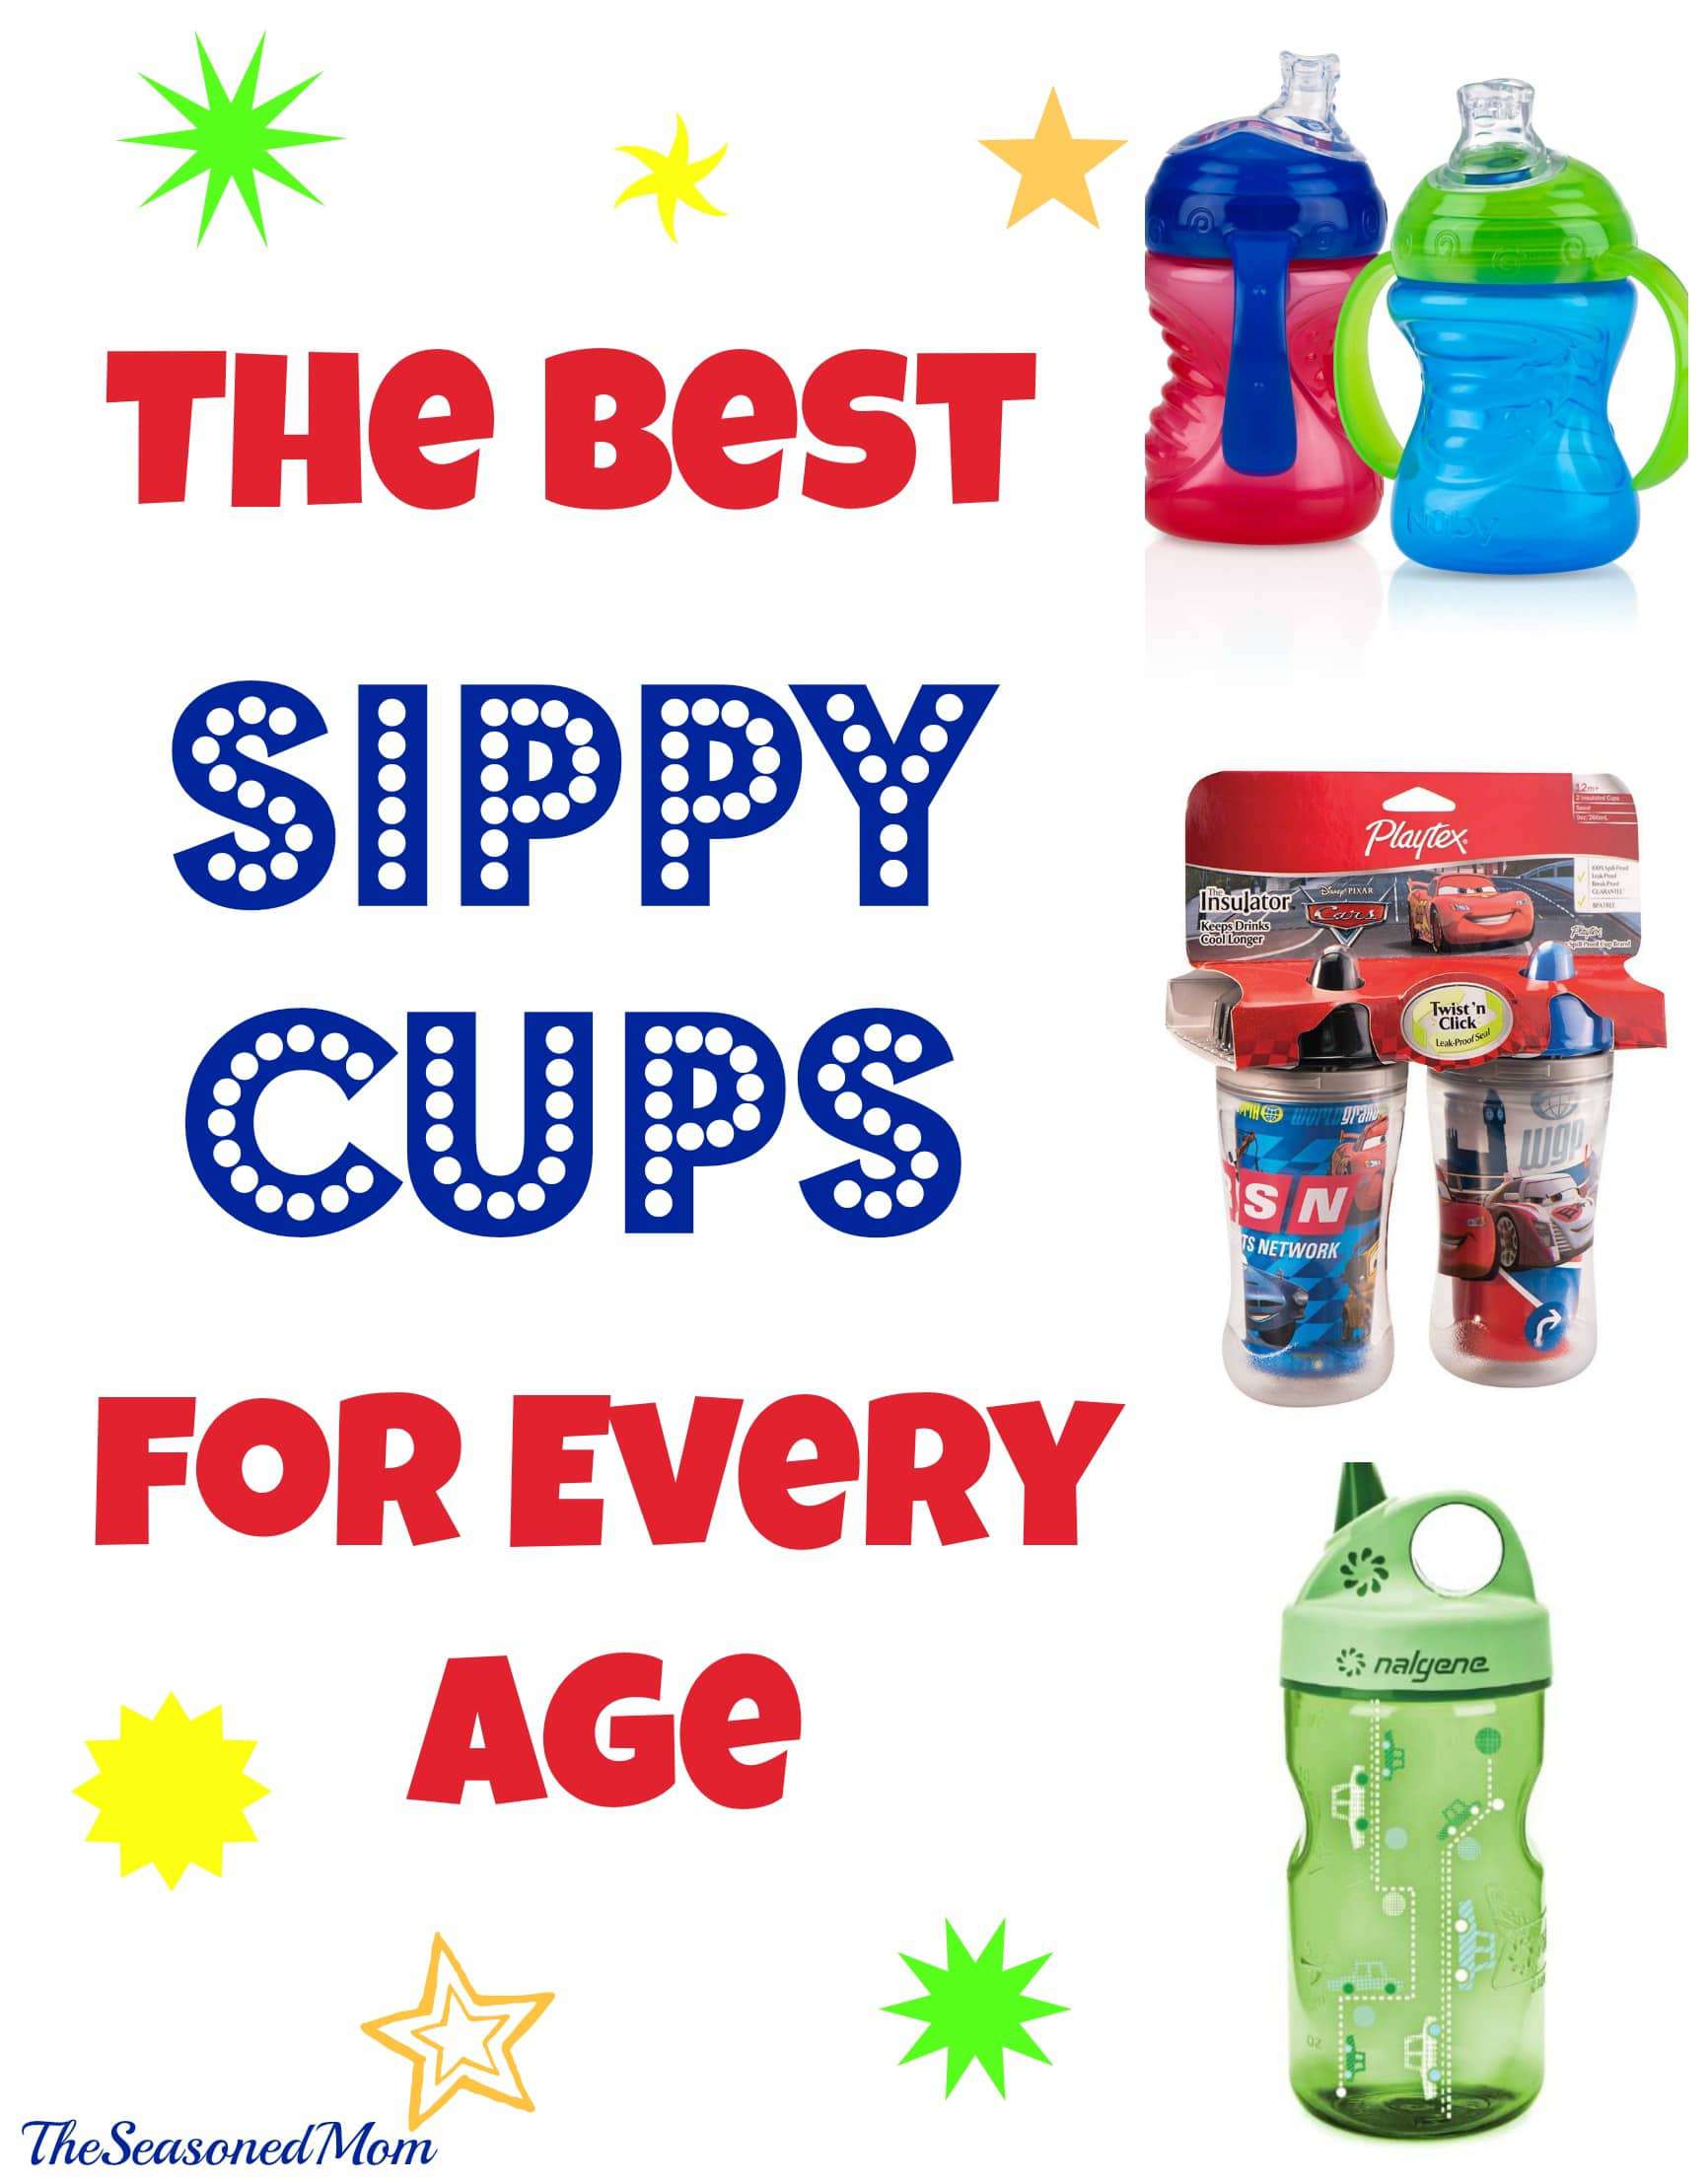 https://www.theseasonedmom.com/wp-content/uploads/2014/08/The-Best-Sippy-Cups-for-Every-Age.jpg